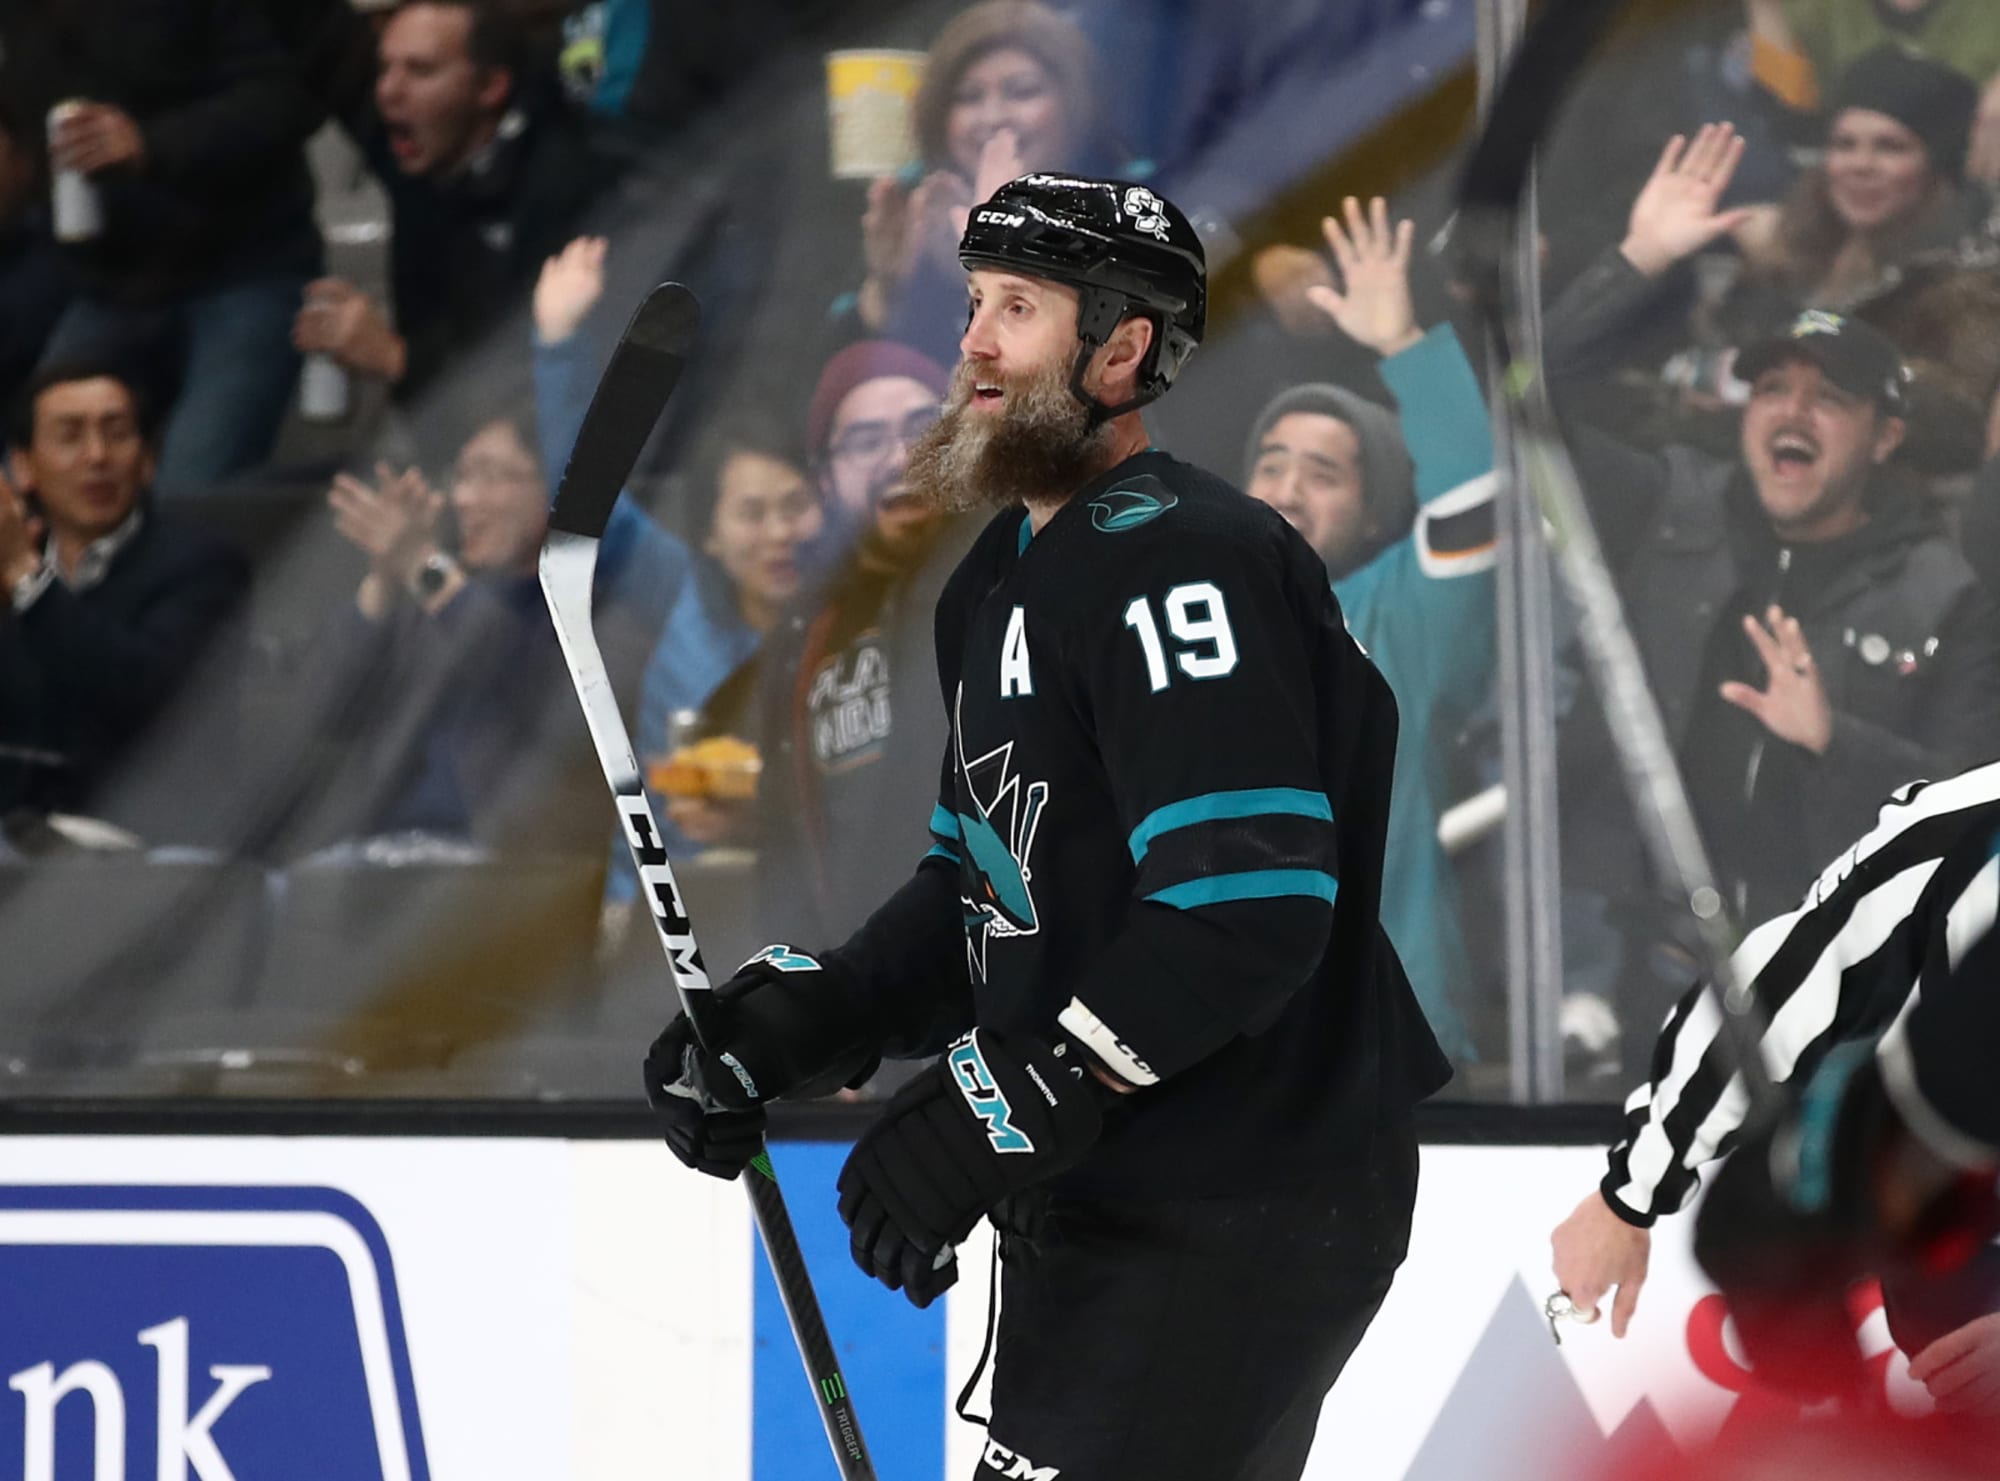 Joe Thornton Reacts to Scoring his First Goal as a Maple Leaf